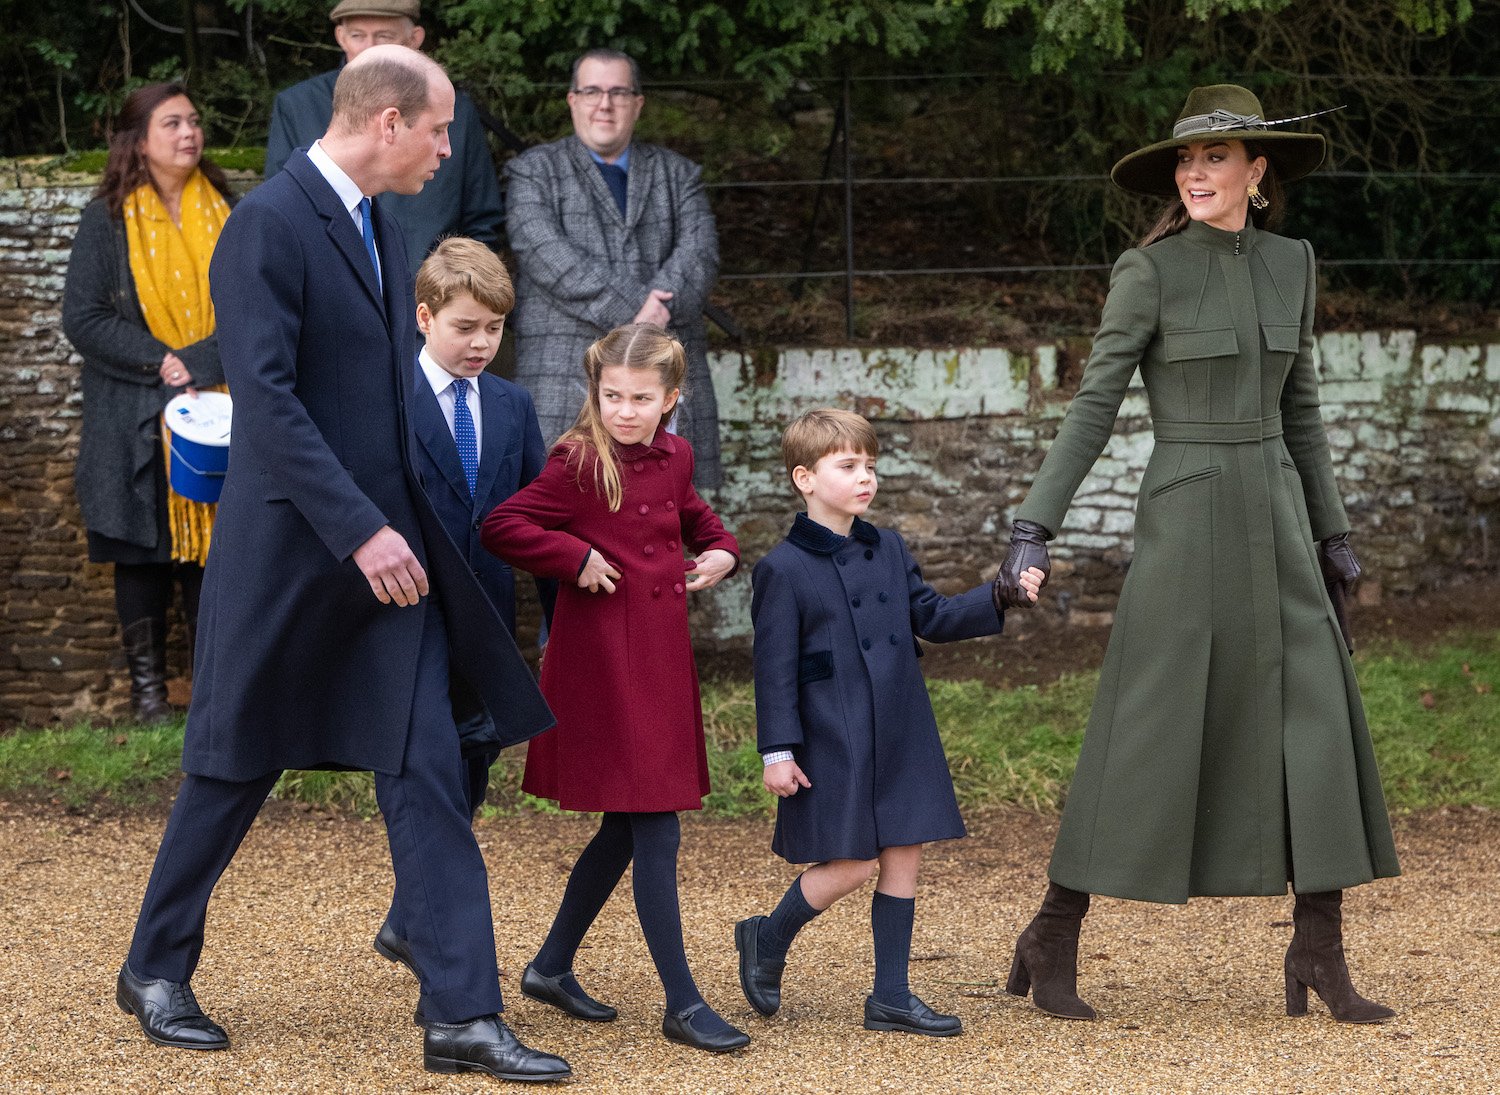 Prince William and Kate Middleton body language during Christmas Sandringham walk shows they are hands-off parents, expert says